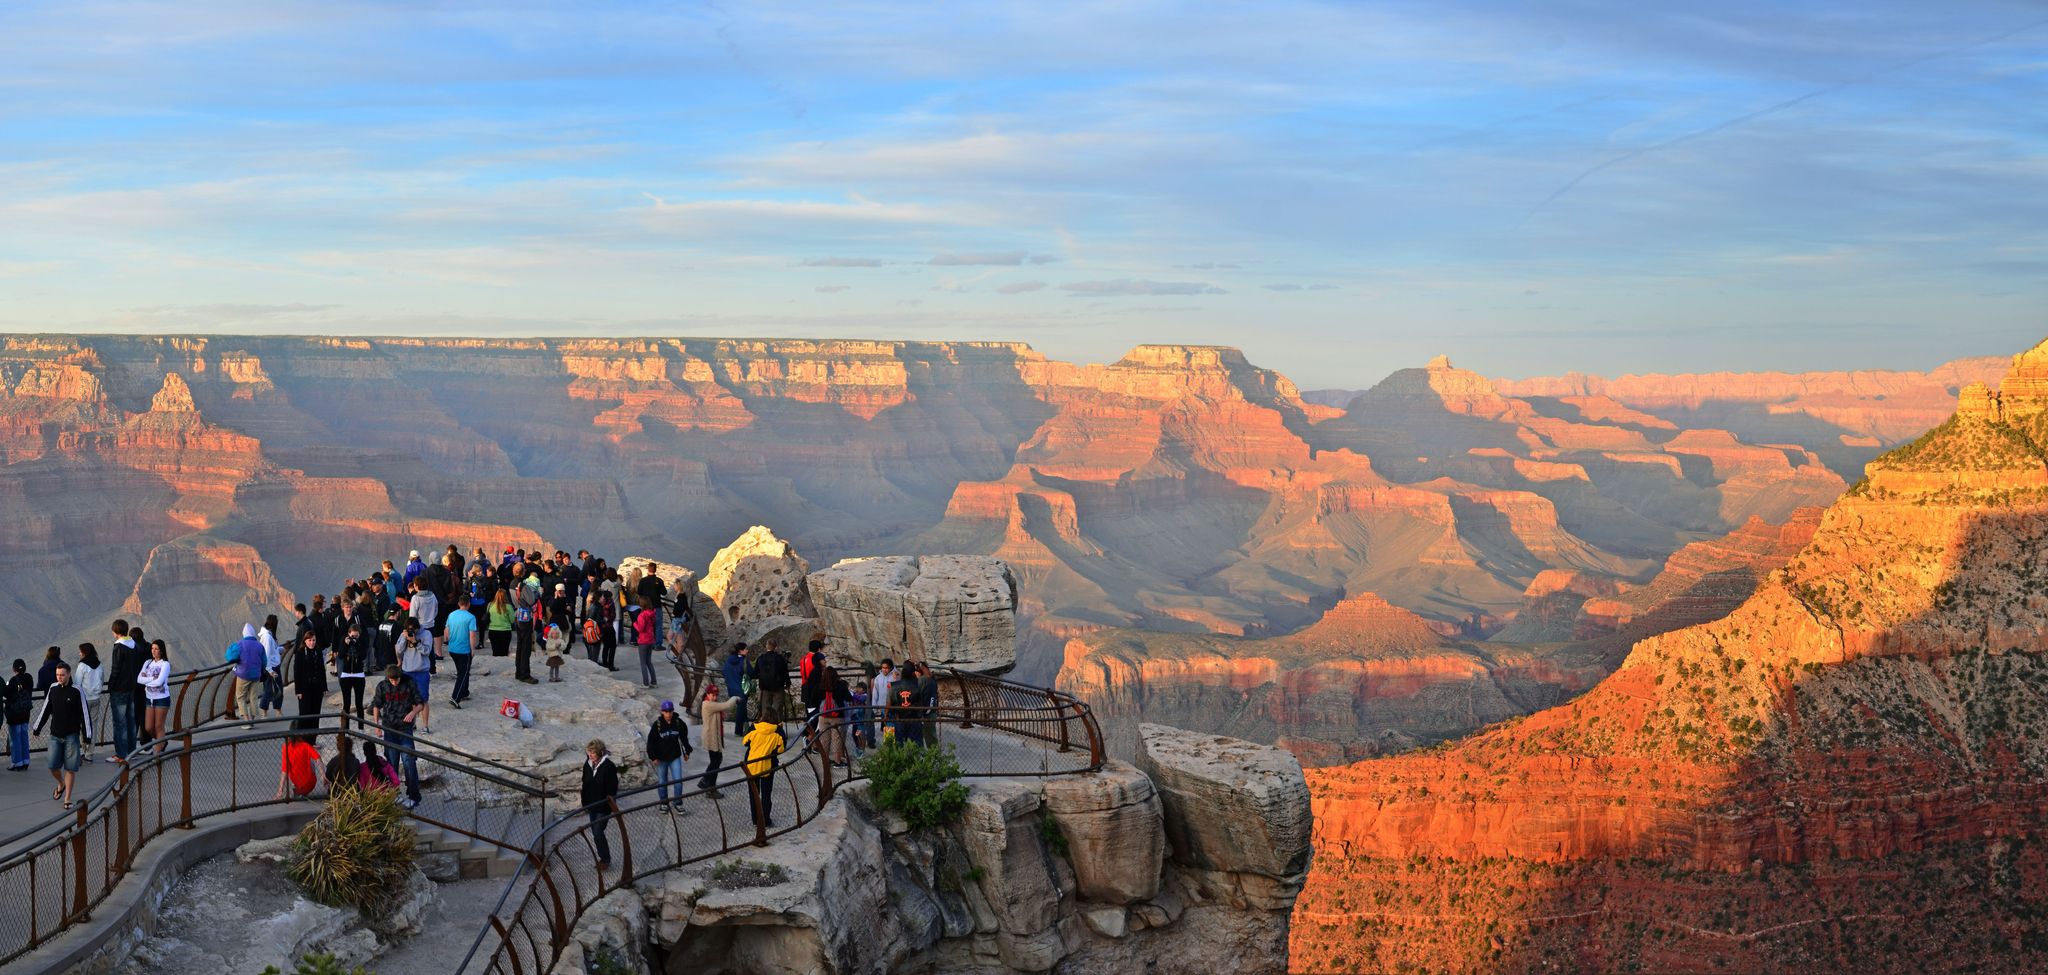 People come from all over the world to view Grand Canyon's sunset